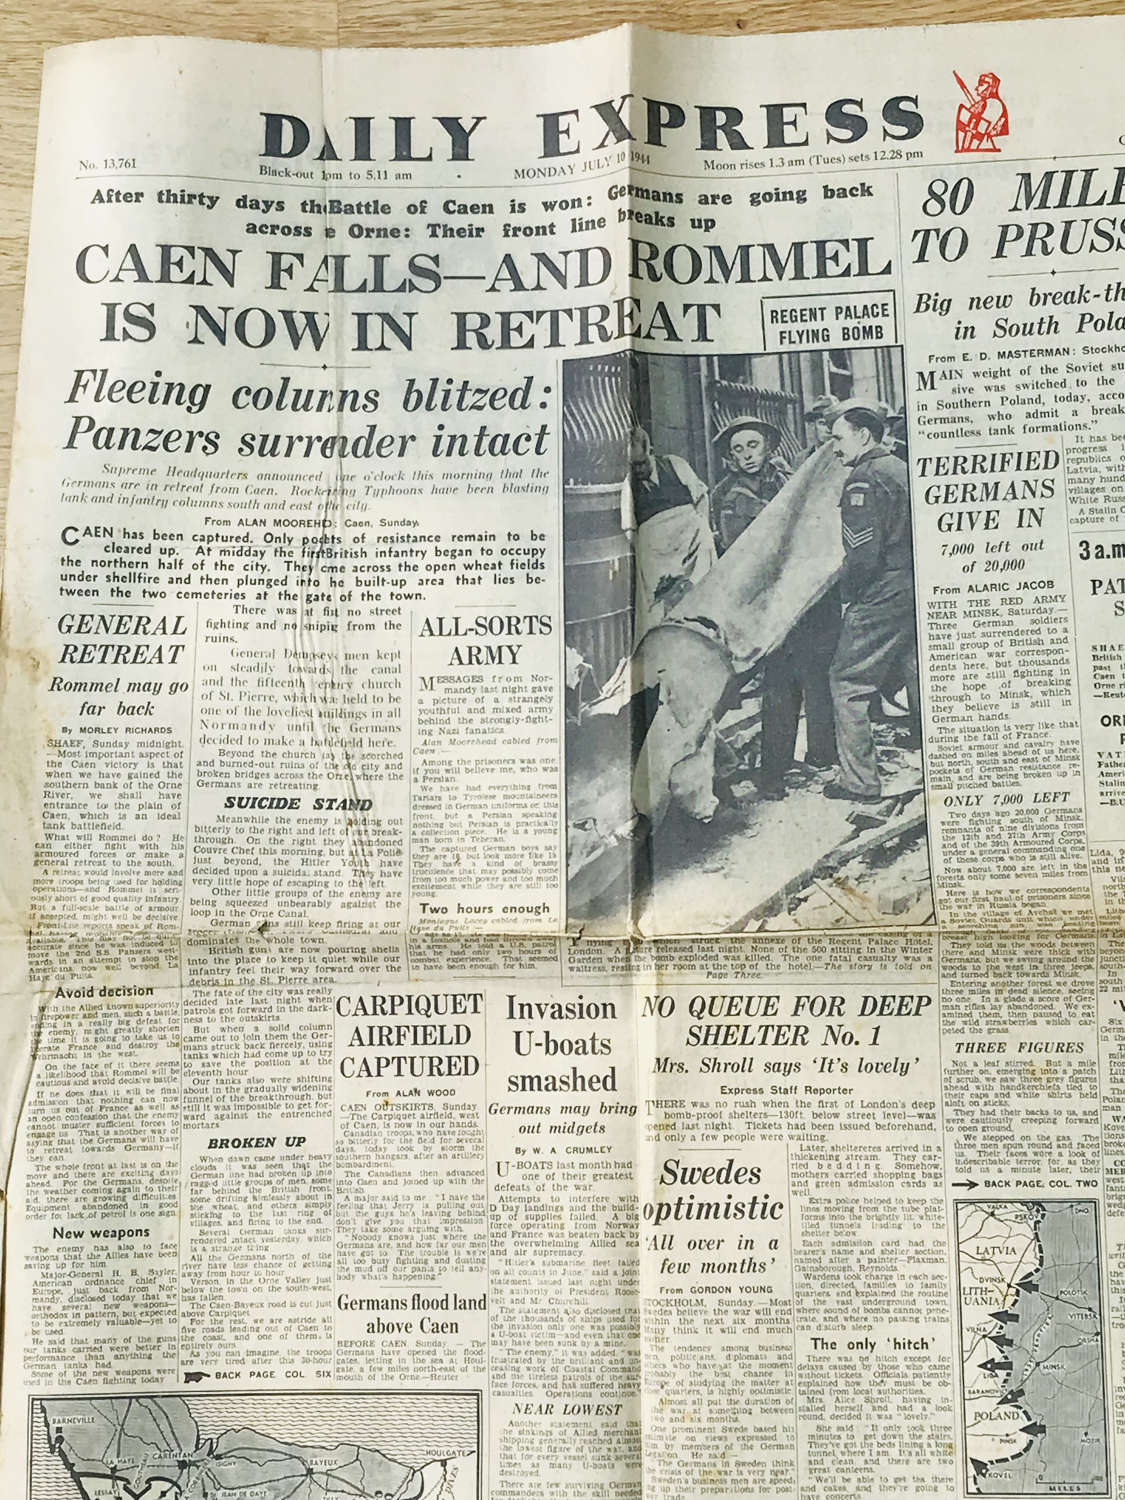 Daily express dated 10th of July 1944 (normandy)